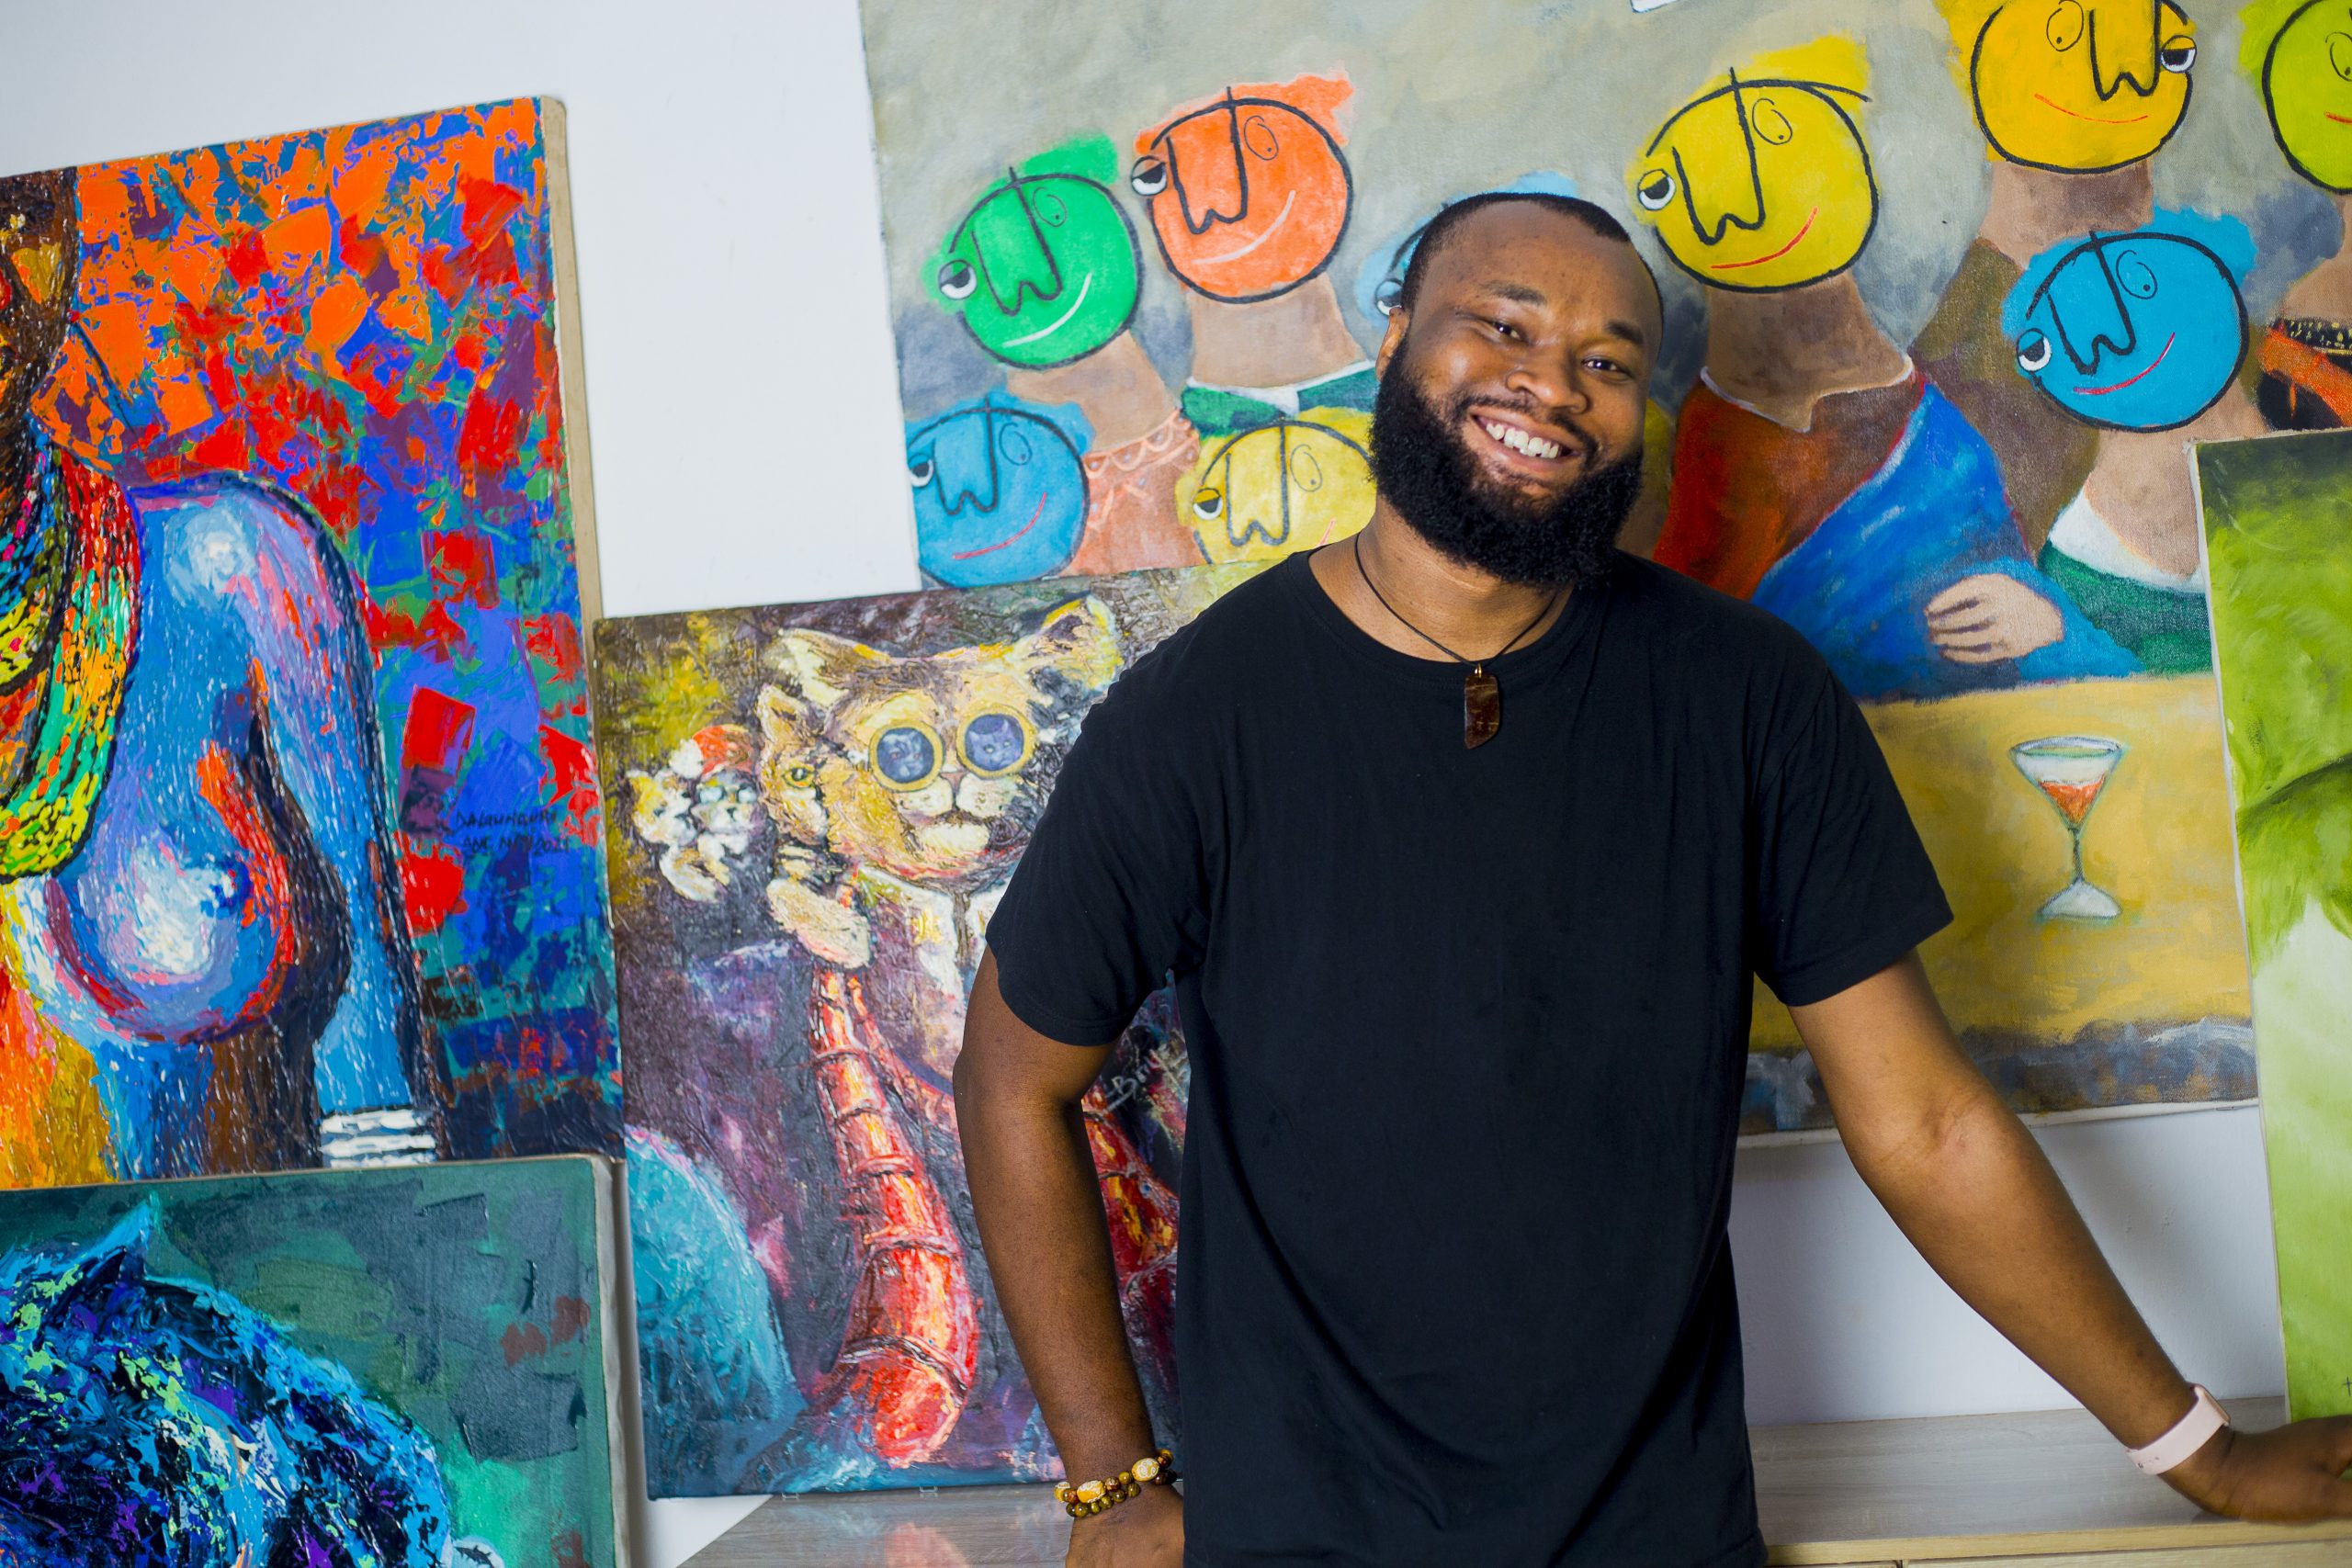 7 Questions for Artist and Gallerist Dunmade Ayegbayo on the Values That Define the ‘Rich and Diverse’ Nigerian Contemporary Art Scene | Artnet News